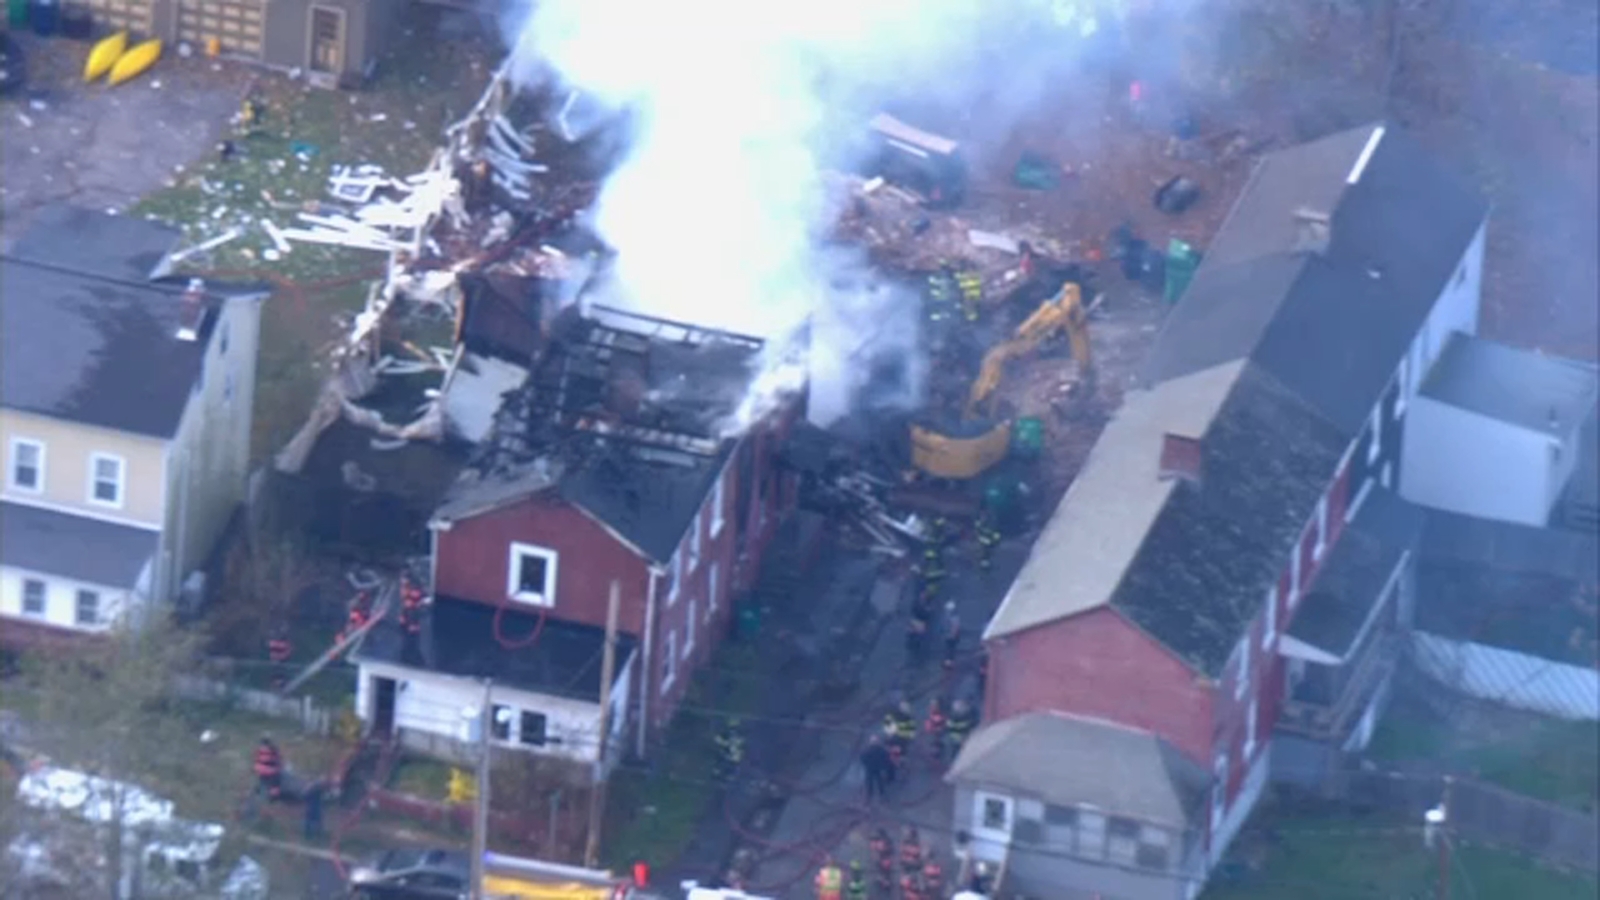 15 injured after explosion levels house in Wappingers Falls